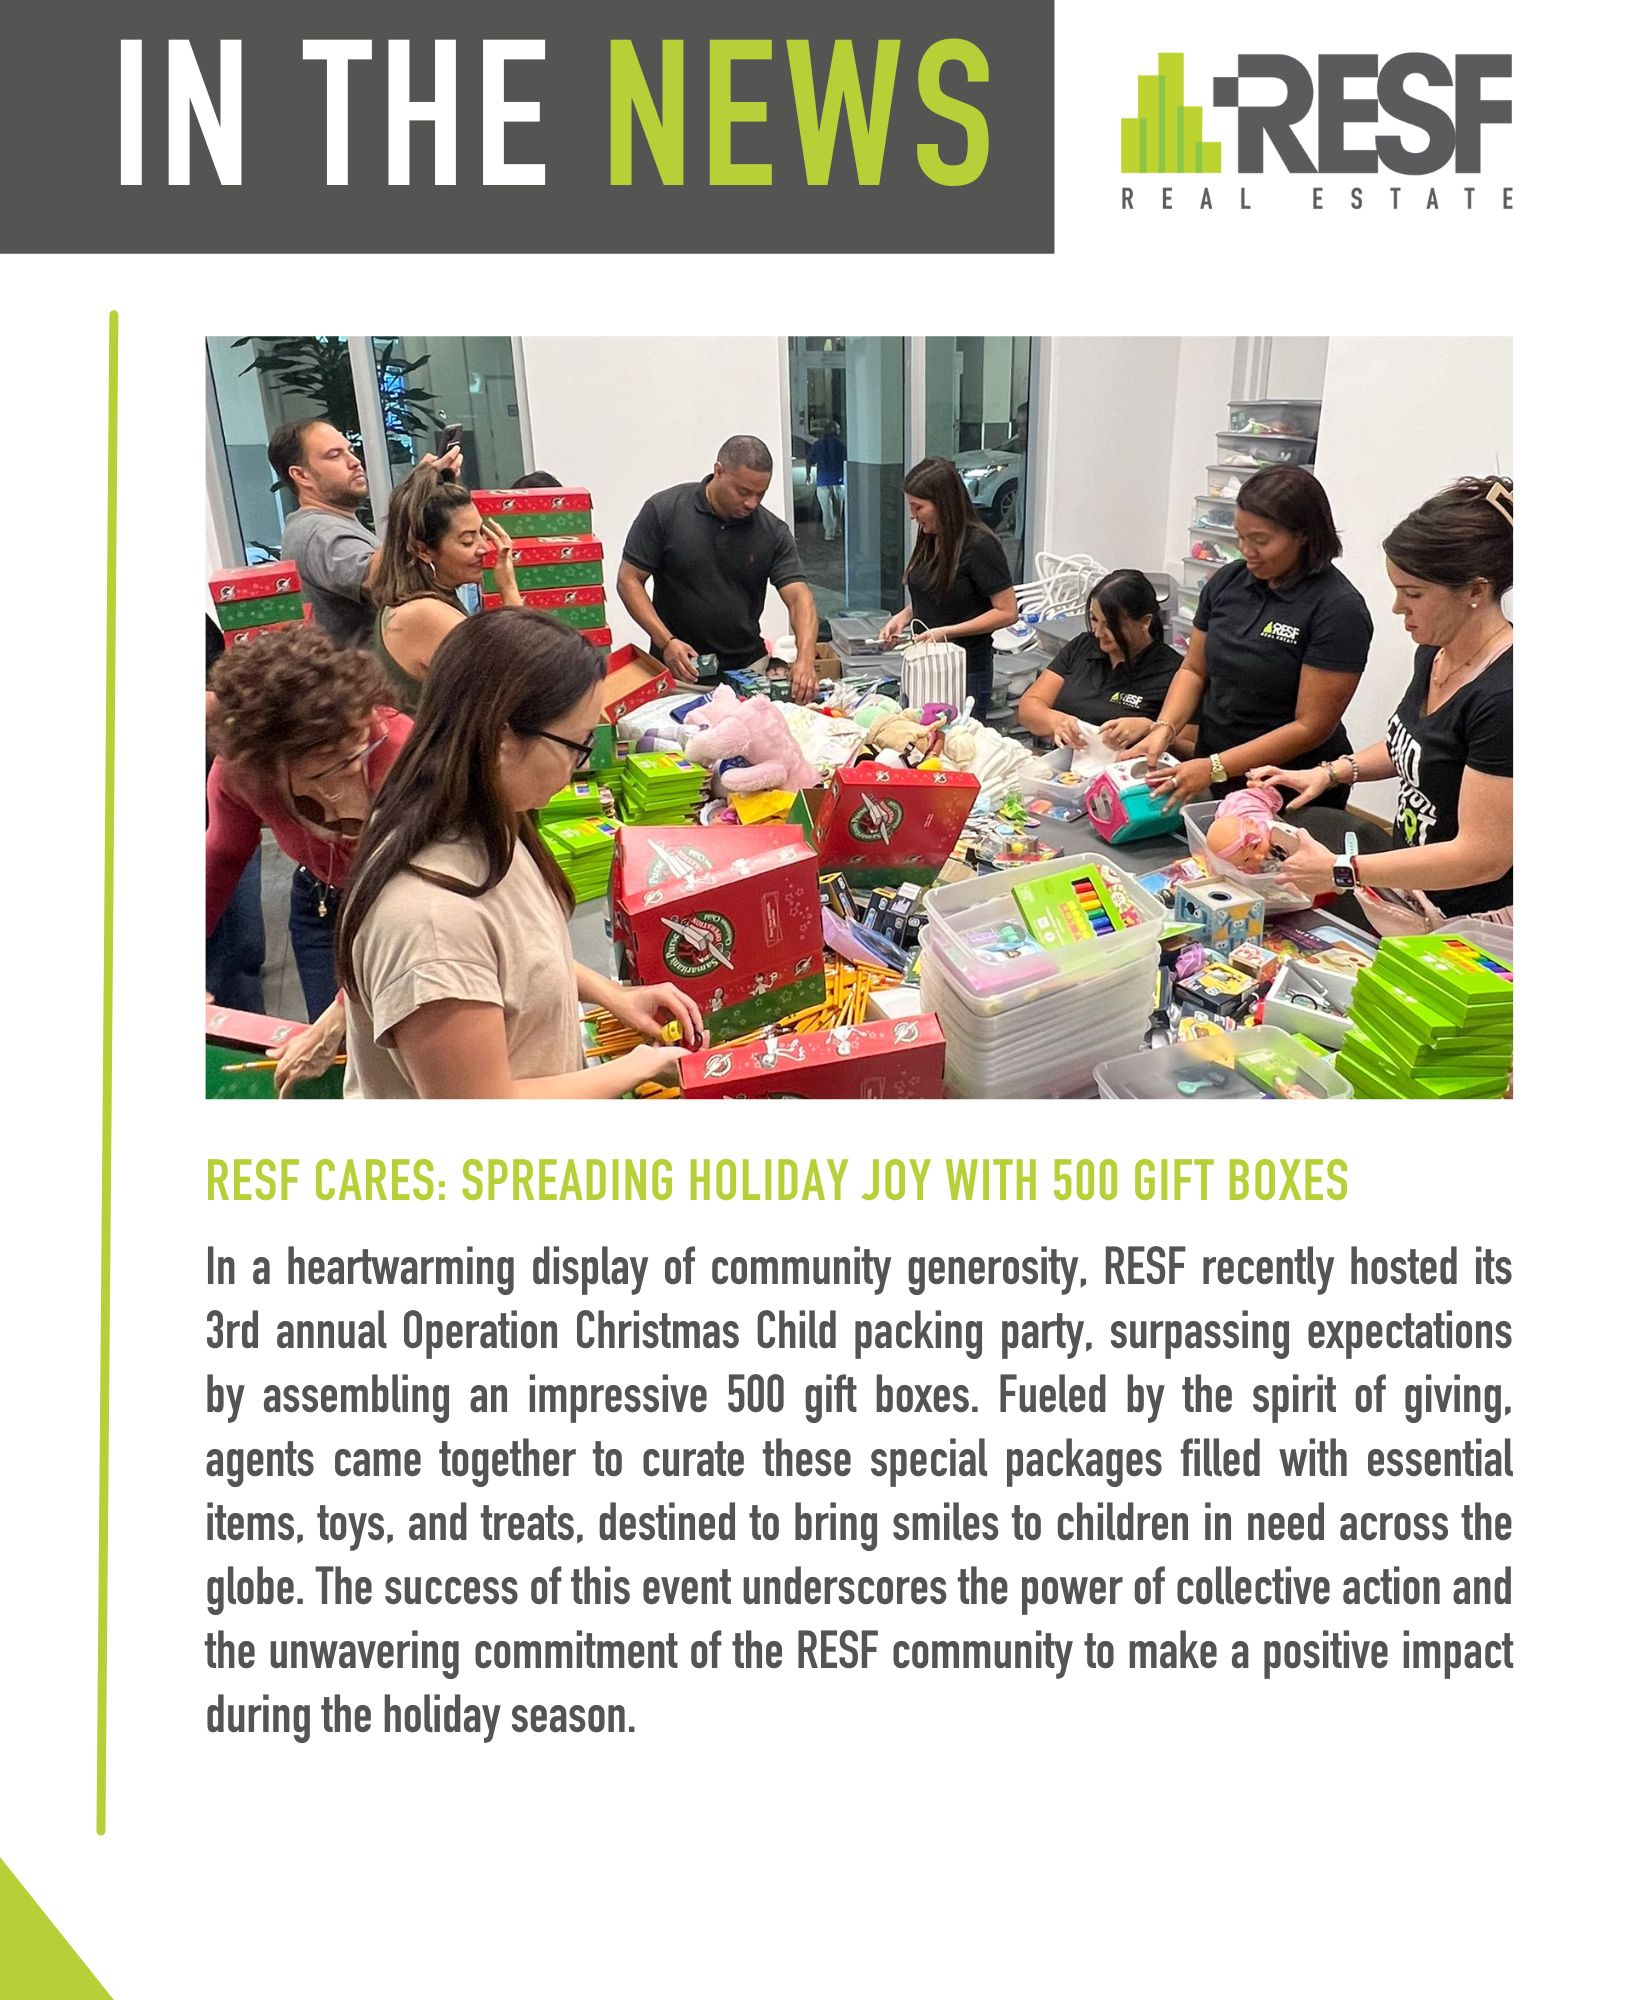 RESF Cares: Spreading Holiday Joy with 500 Gift Boxes